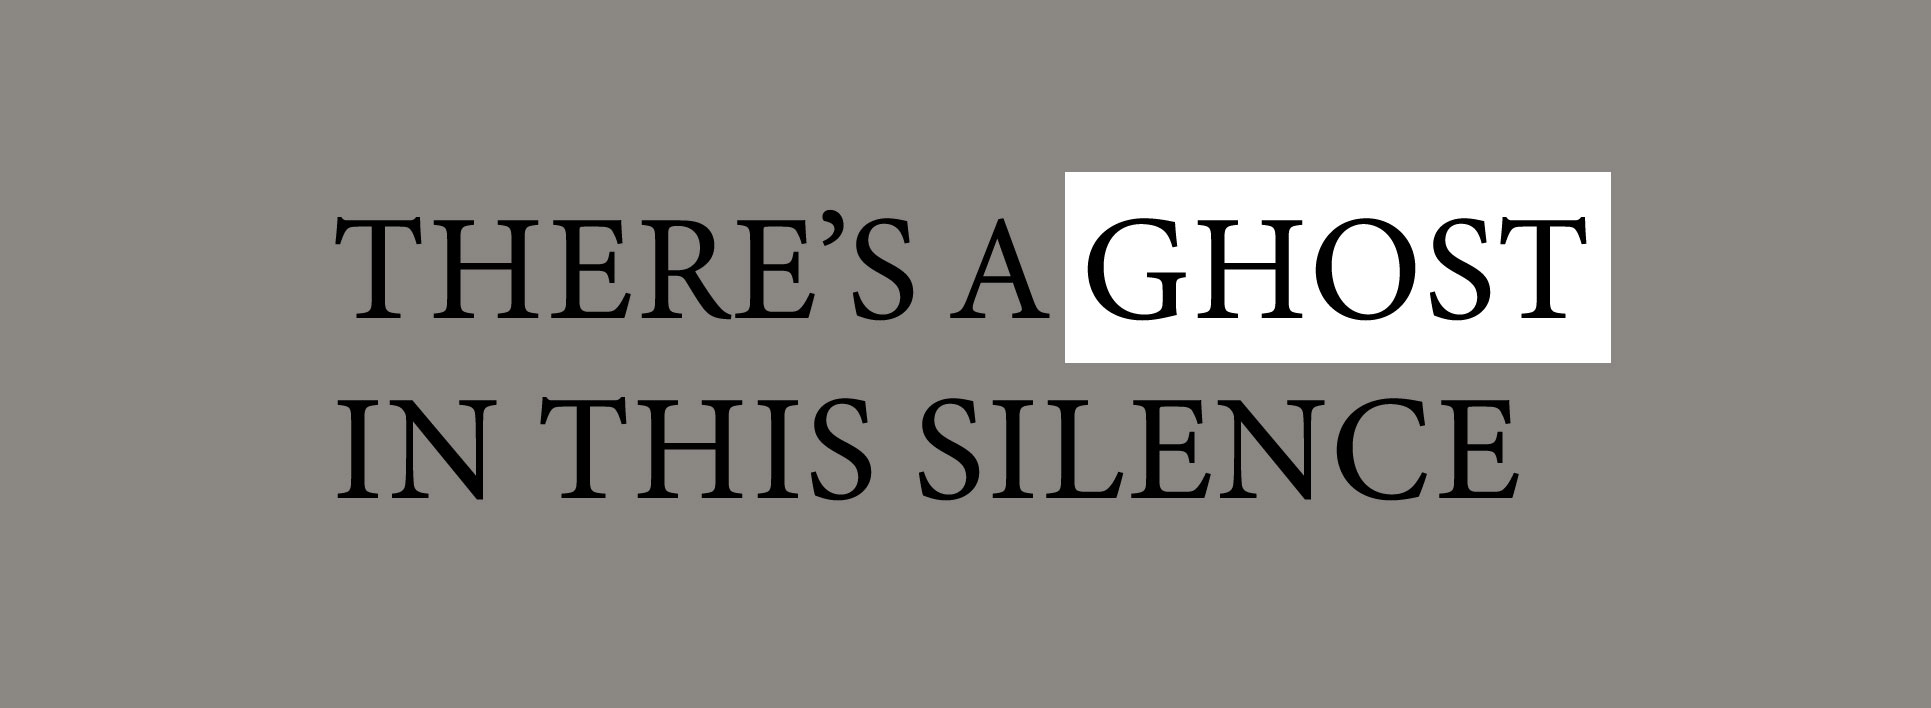 There's A Ghost In This Silence